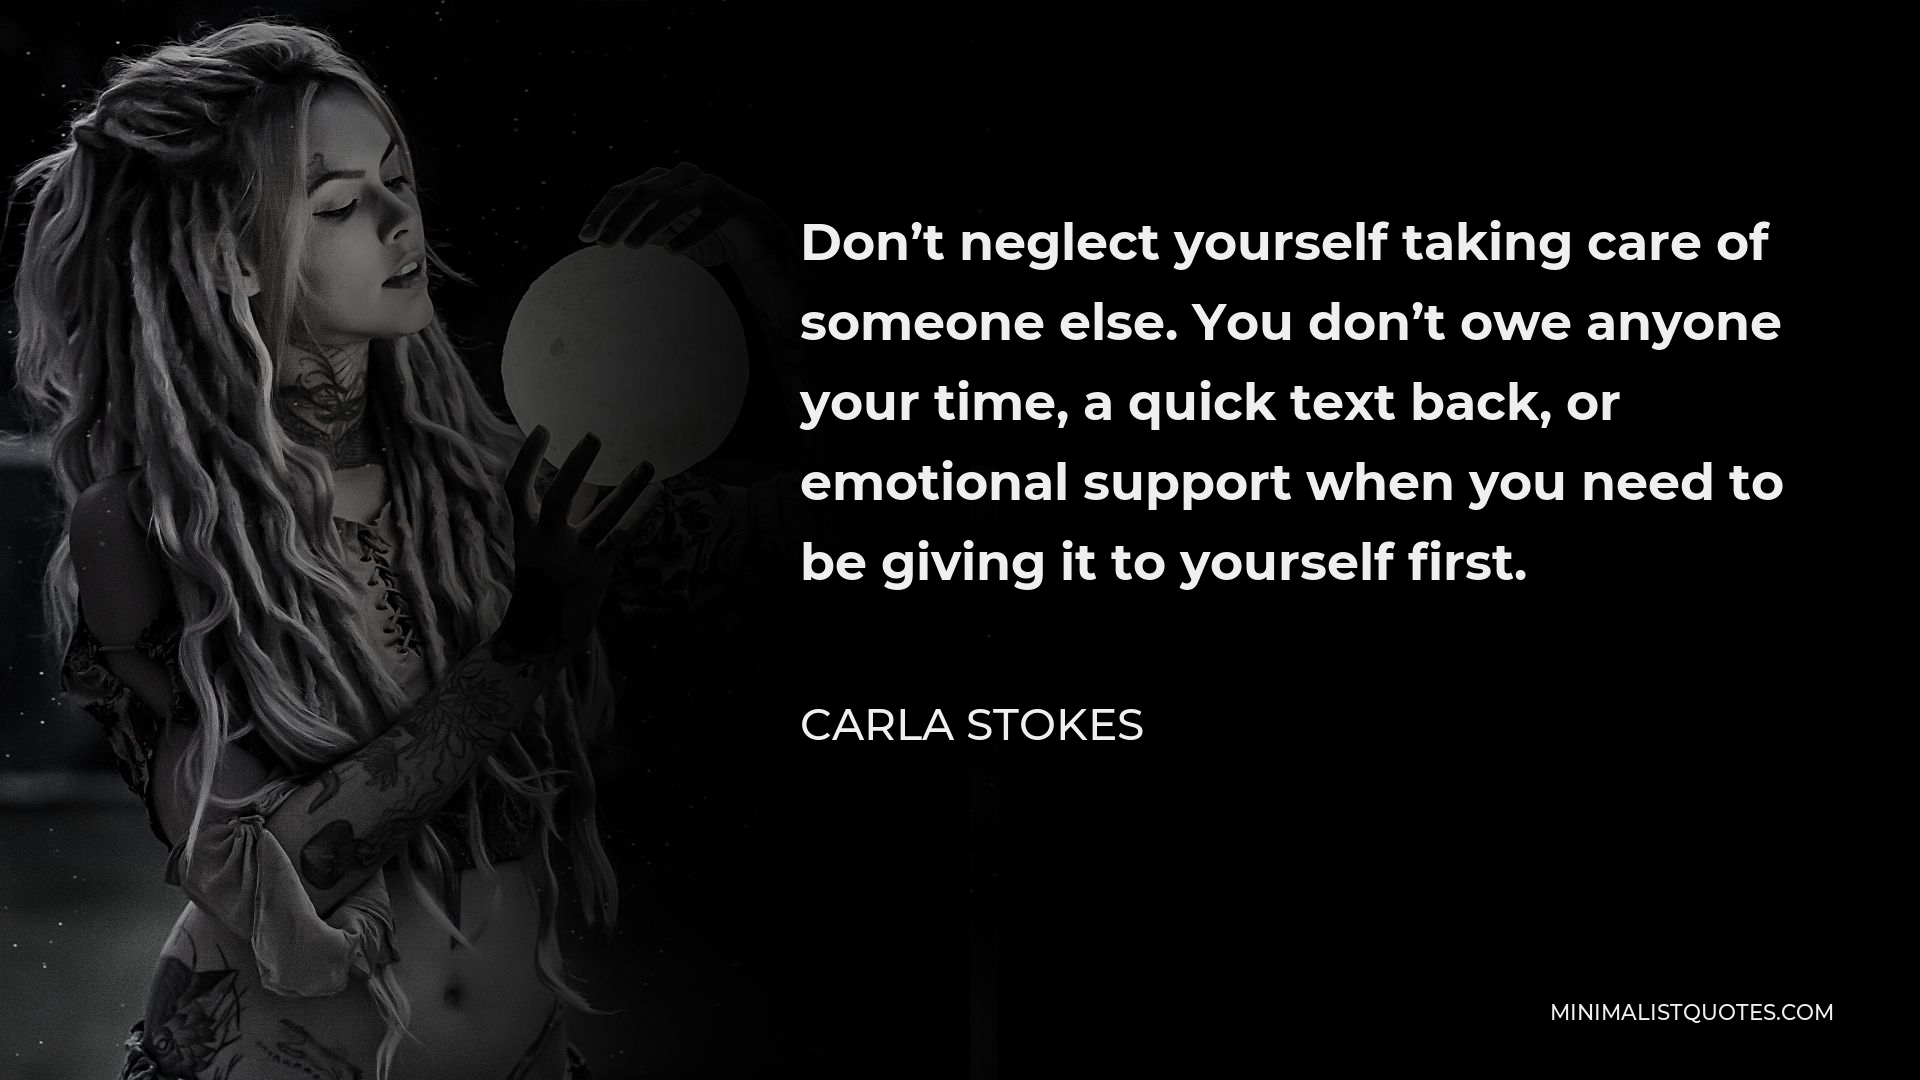 Carla Stokes Quote - Don’t neglect yourself taking care of someone else. You don’t owe anyone your time, a quick text back, or emotional support when you need to be giving it to yourself first.